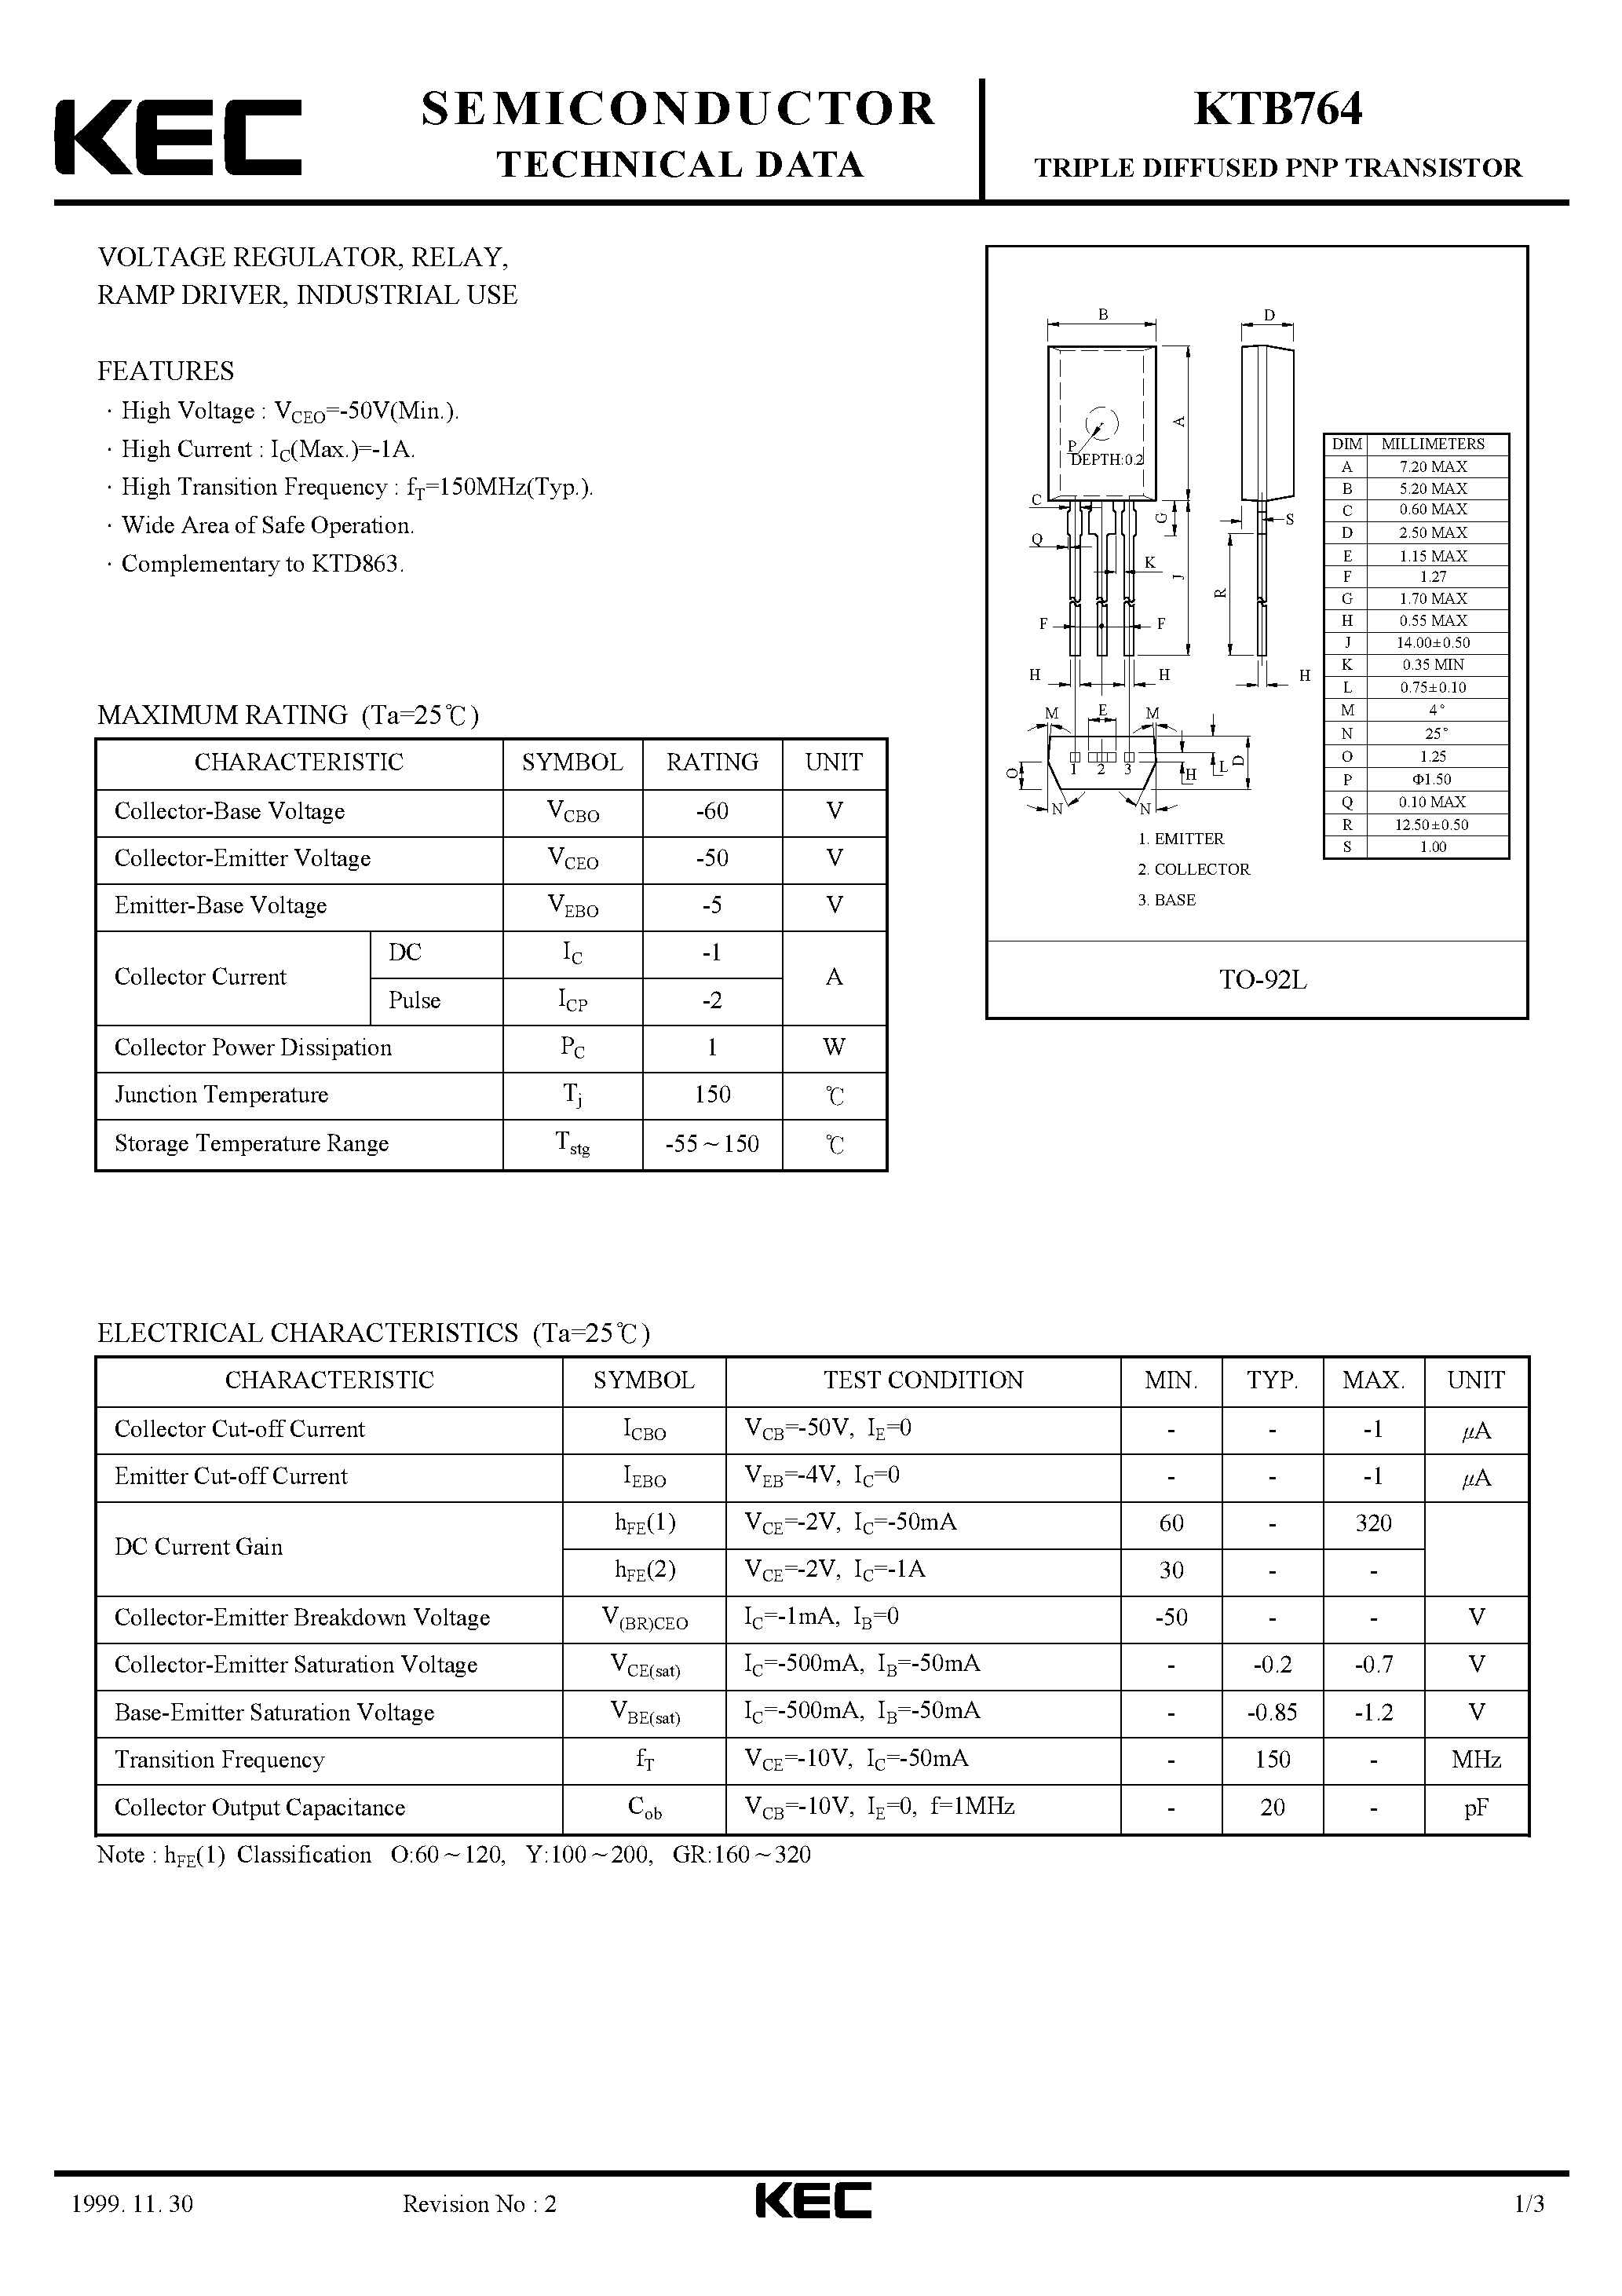 Datasheet KTB764 - TRIPLE DIFFUSED PNP TRANSISTOR(VOLTAGE REGULATOR/ RELAY/ RAMP DRIVER/ INDUSTRIAL USE) page 1